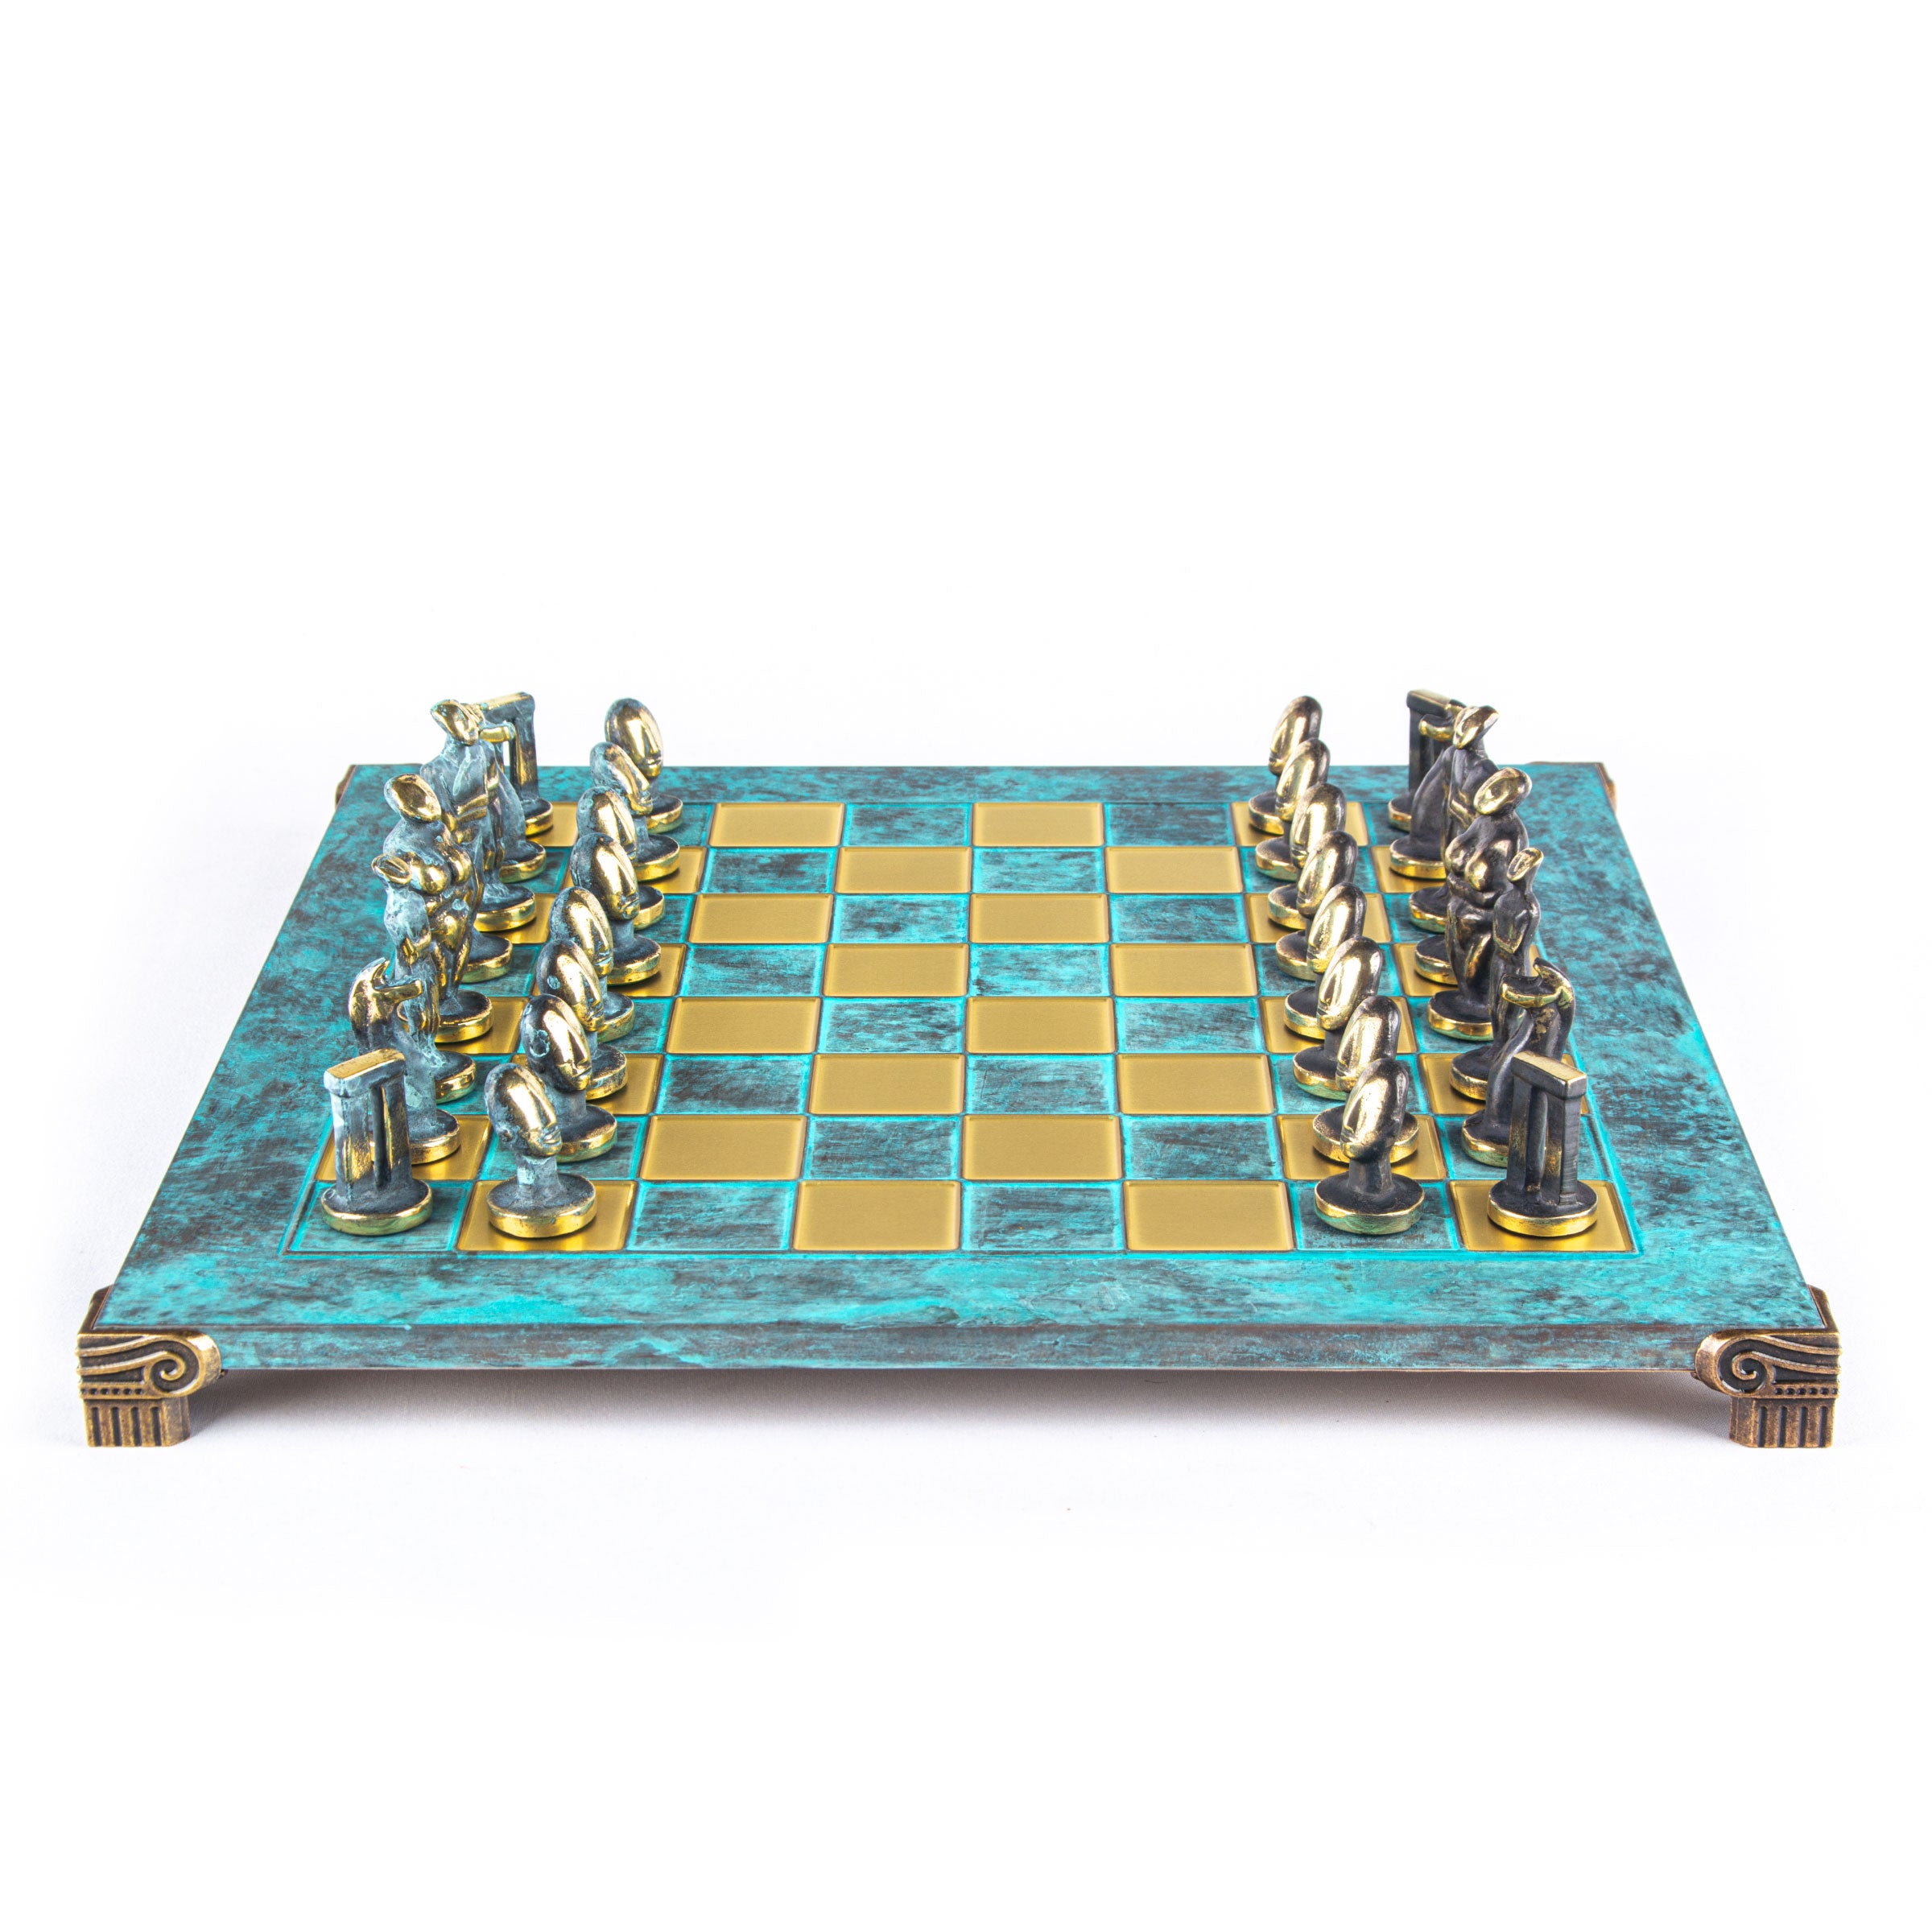 CYCLADIC ART SOLID BRASS CHESS SET with blue/brown chessmen and